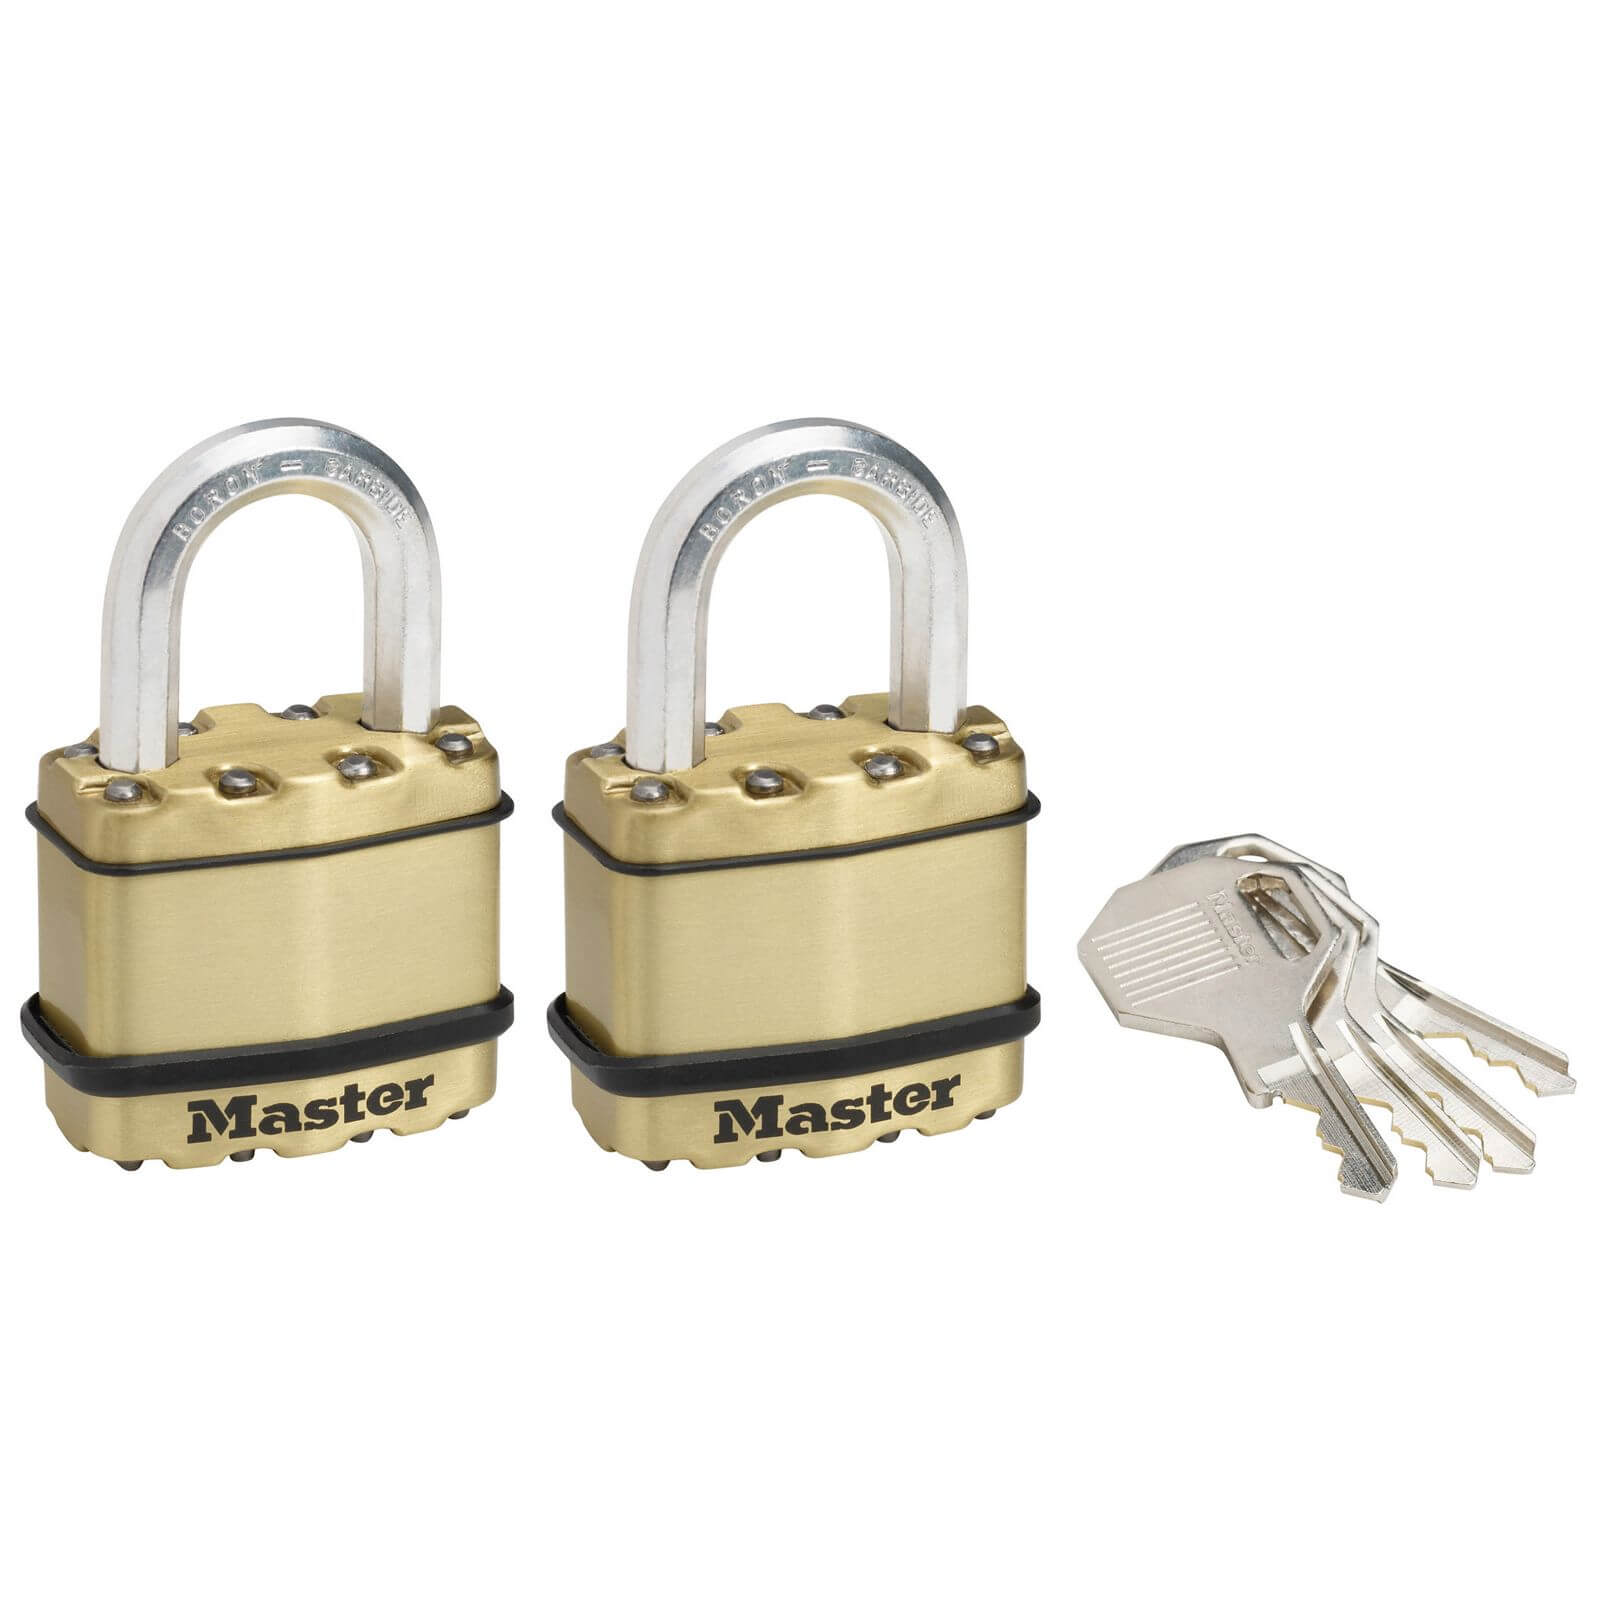 Master Lock Excell Padlock - 45mm - Pack of 2